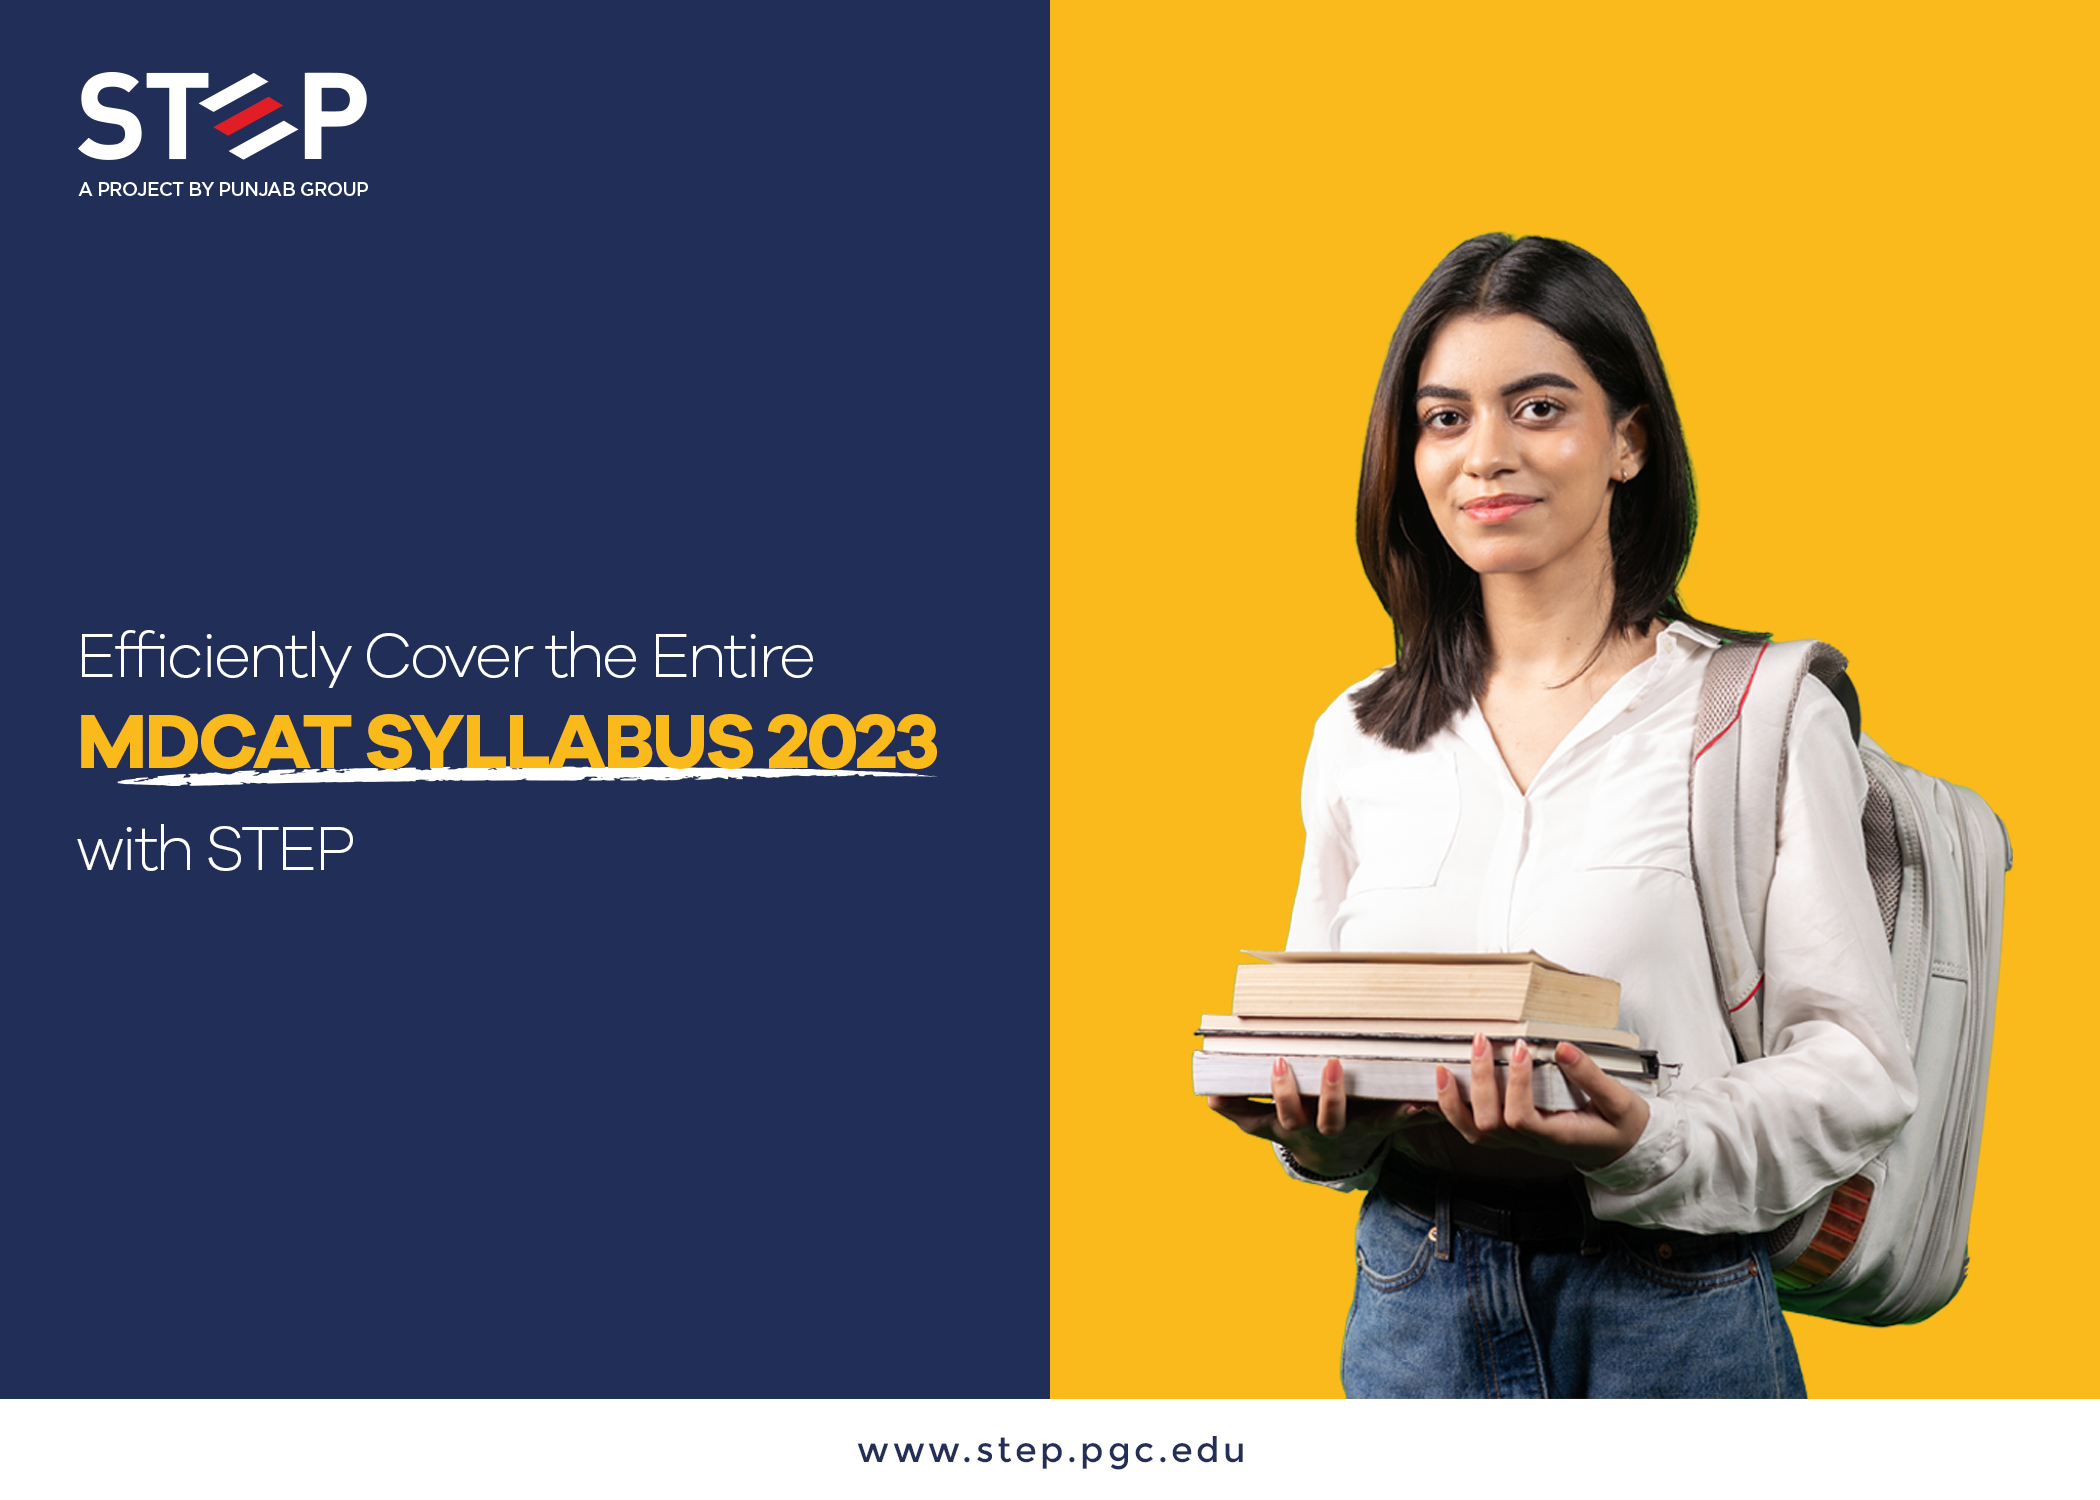 Efficiently Cover the Entire MDCAT Syllabus 2023 with STEP